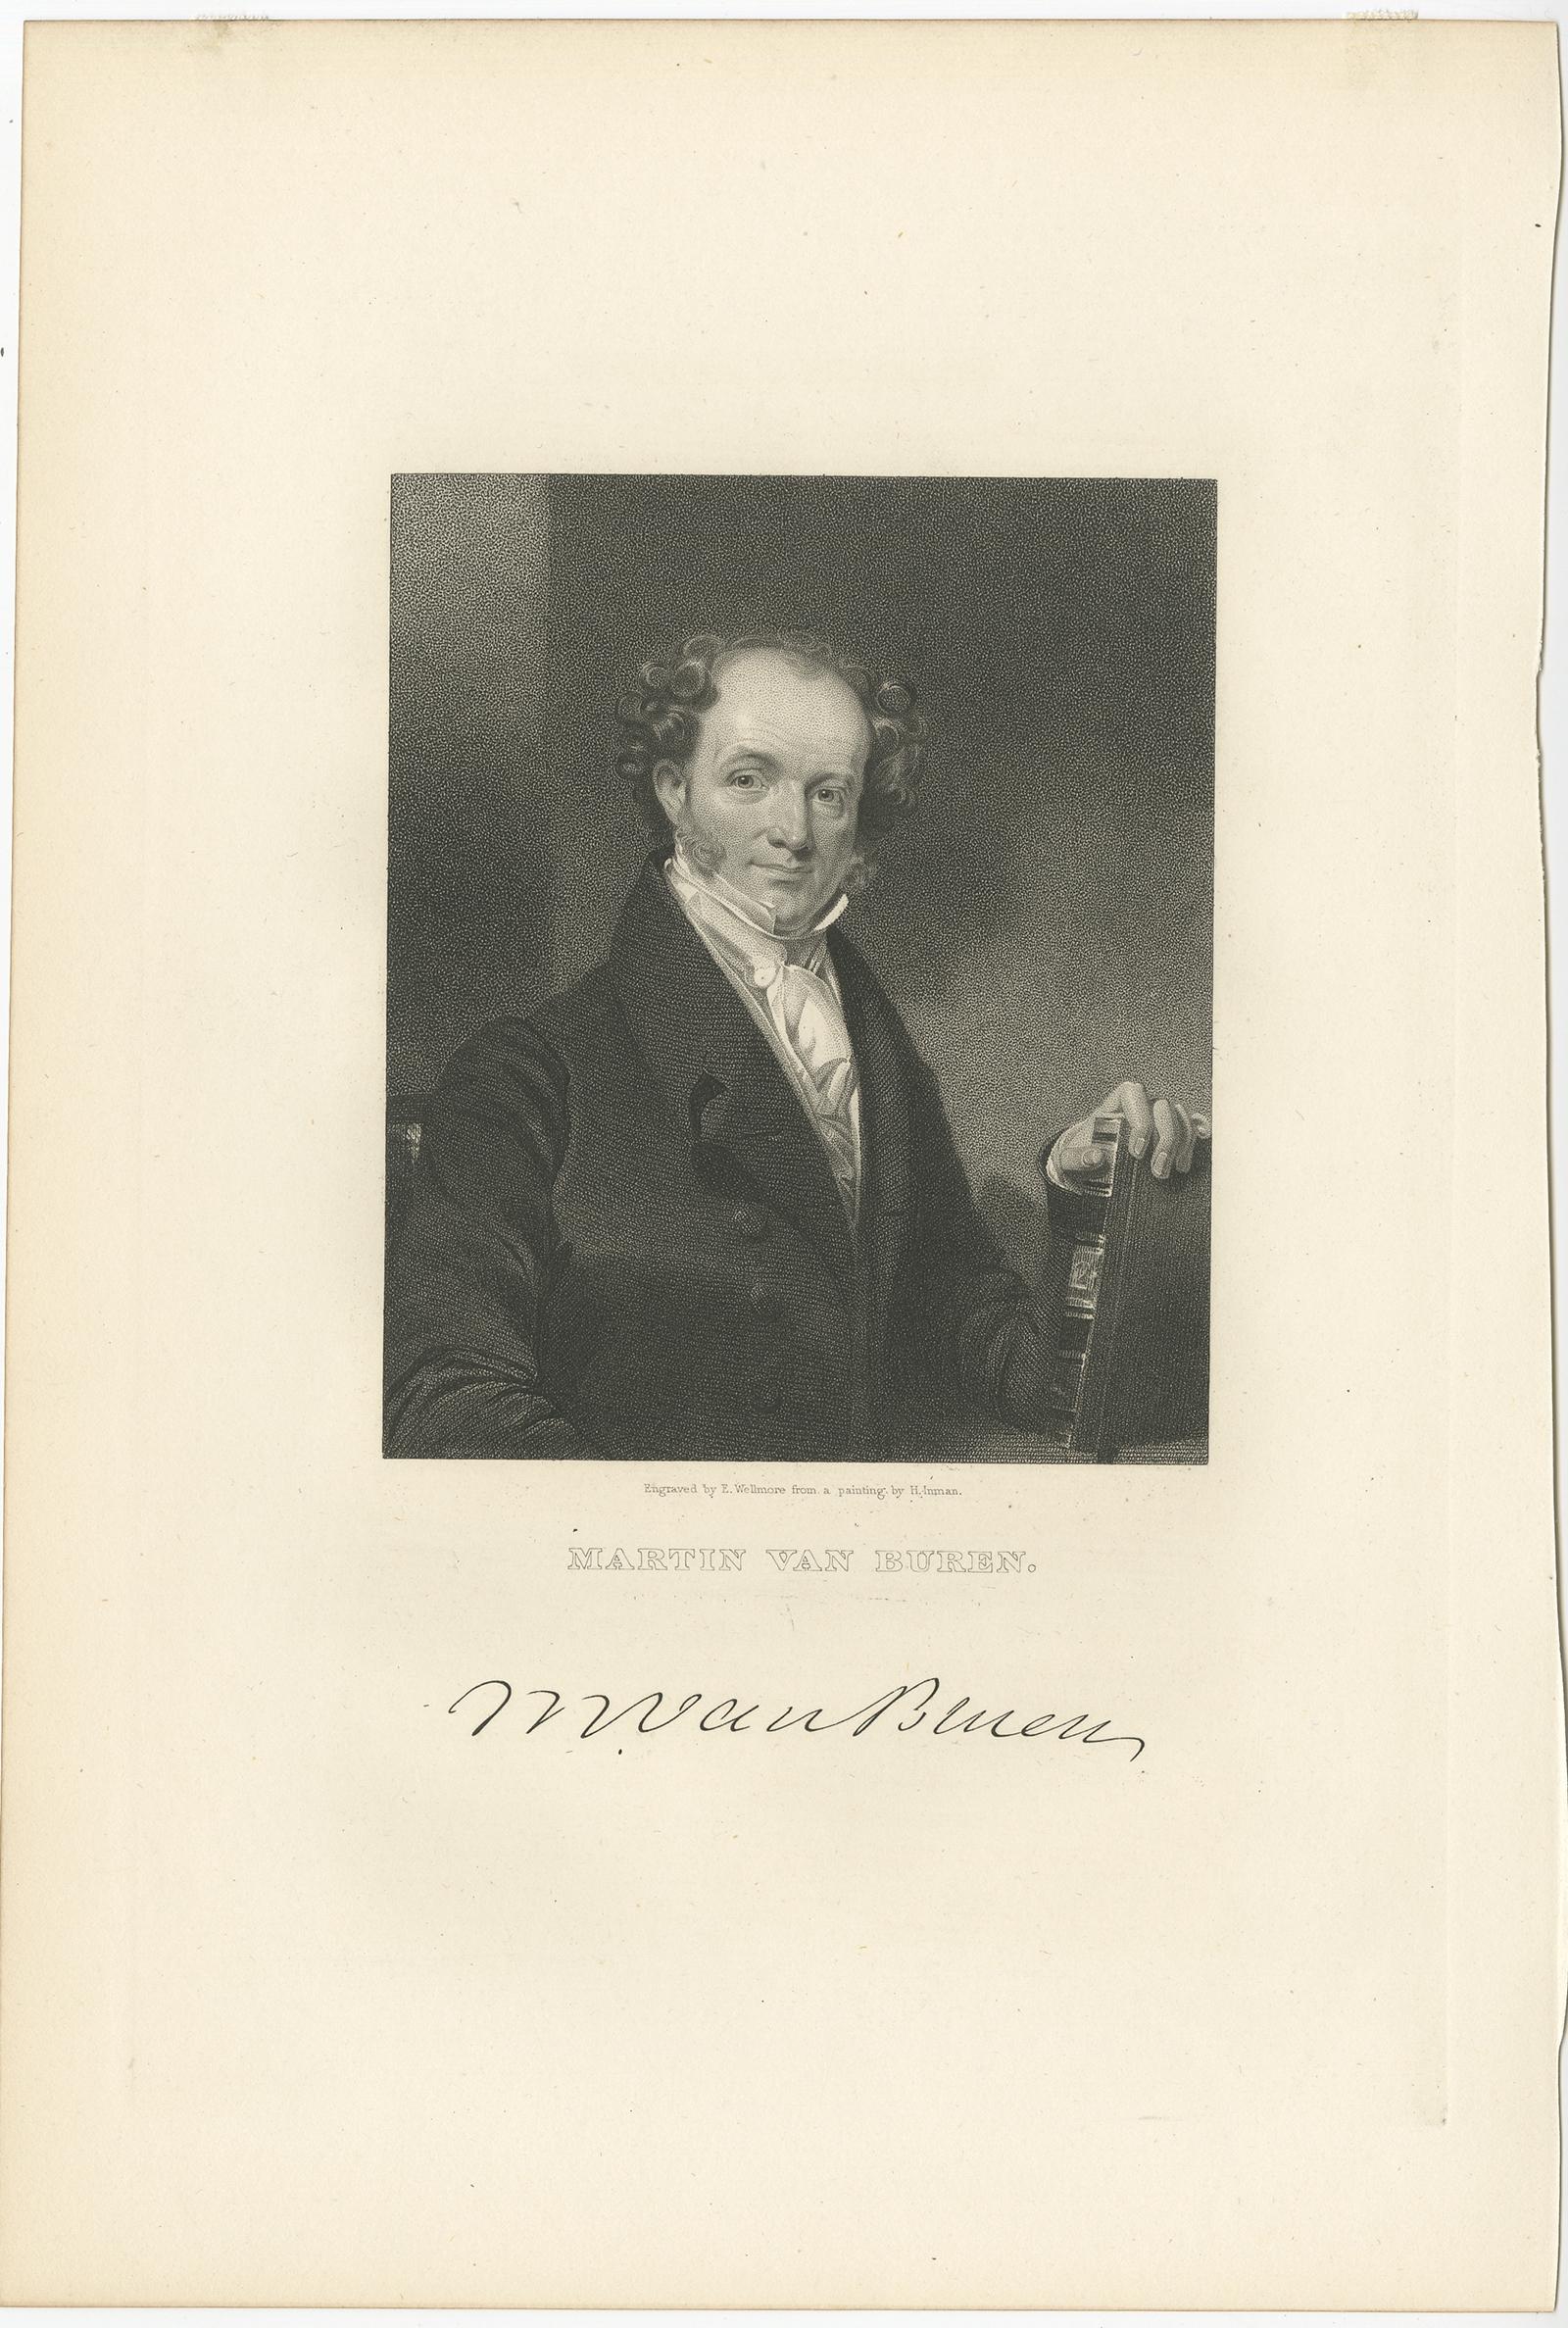 Antique print titled 'Martin van Buren'. Old portrait of Martin van Buren. Martin Van Buren was an American statesman who served as the eighth president of the United States from 1837 to 1841. This print originates from 'The national portrait